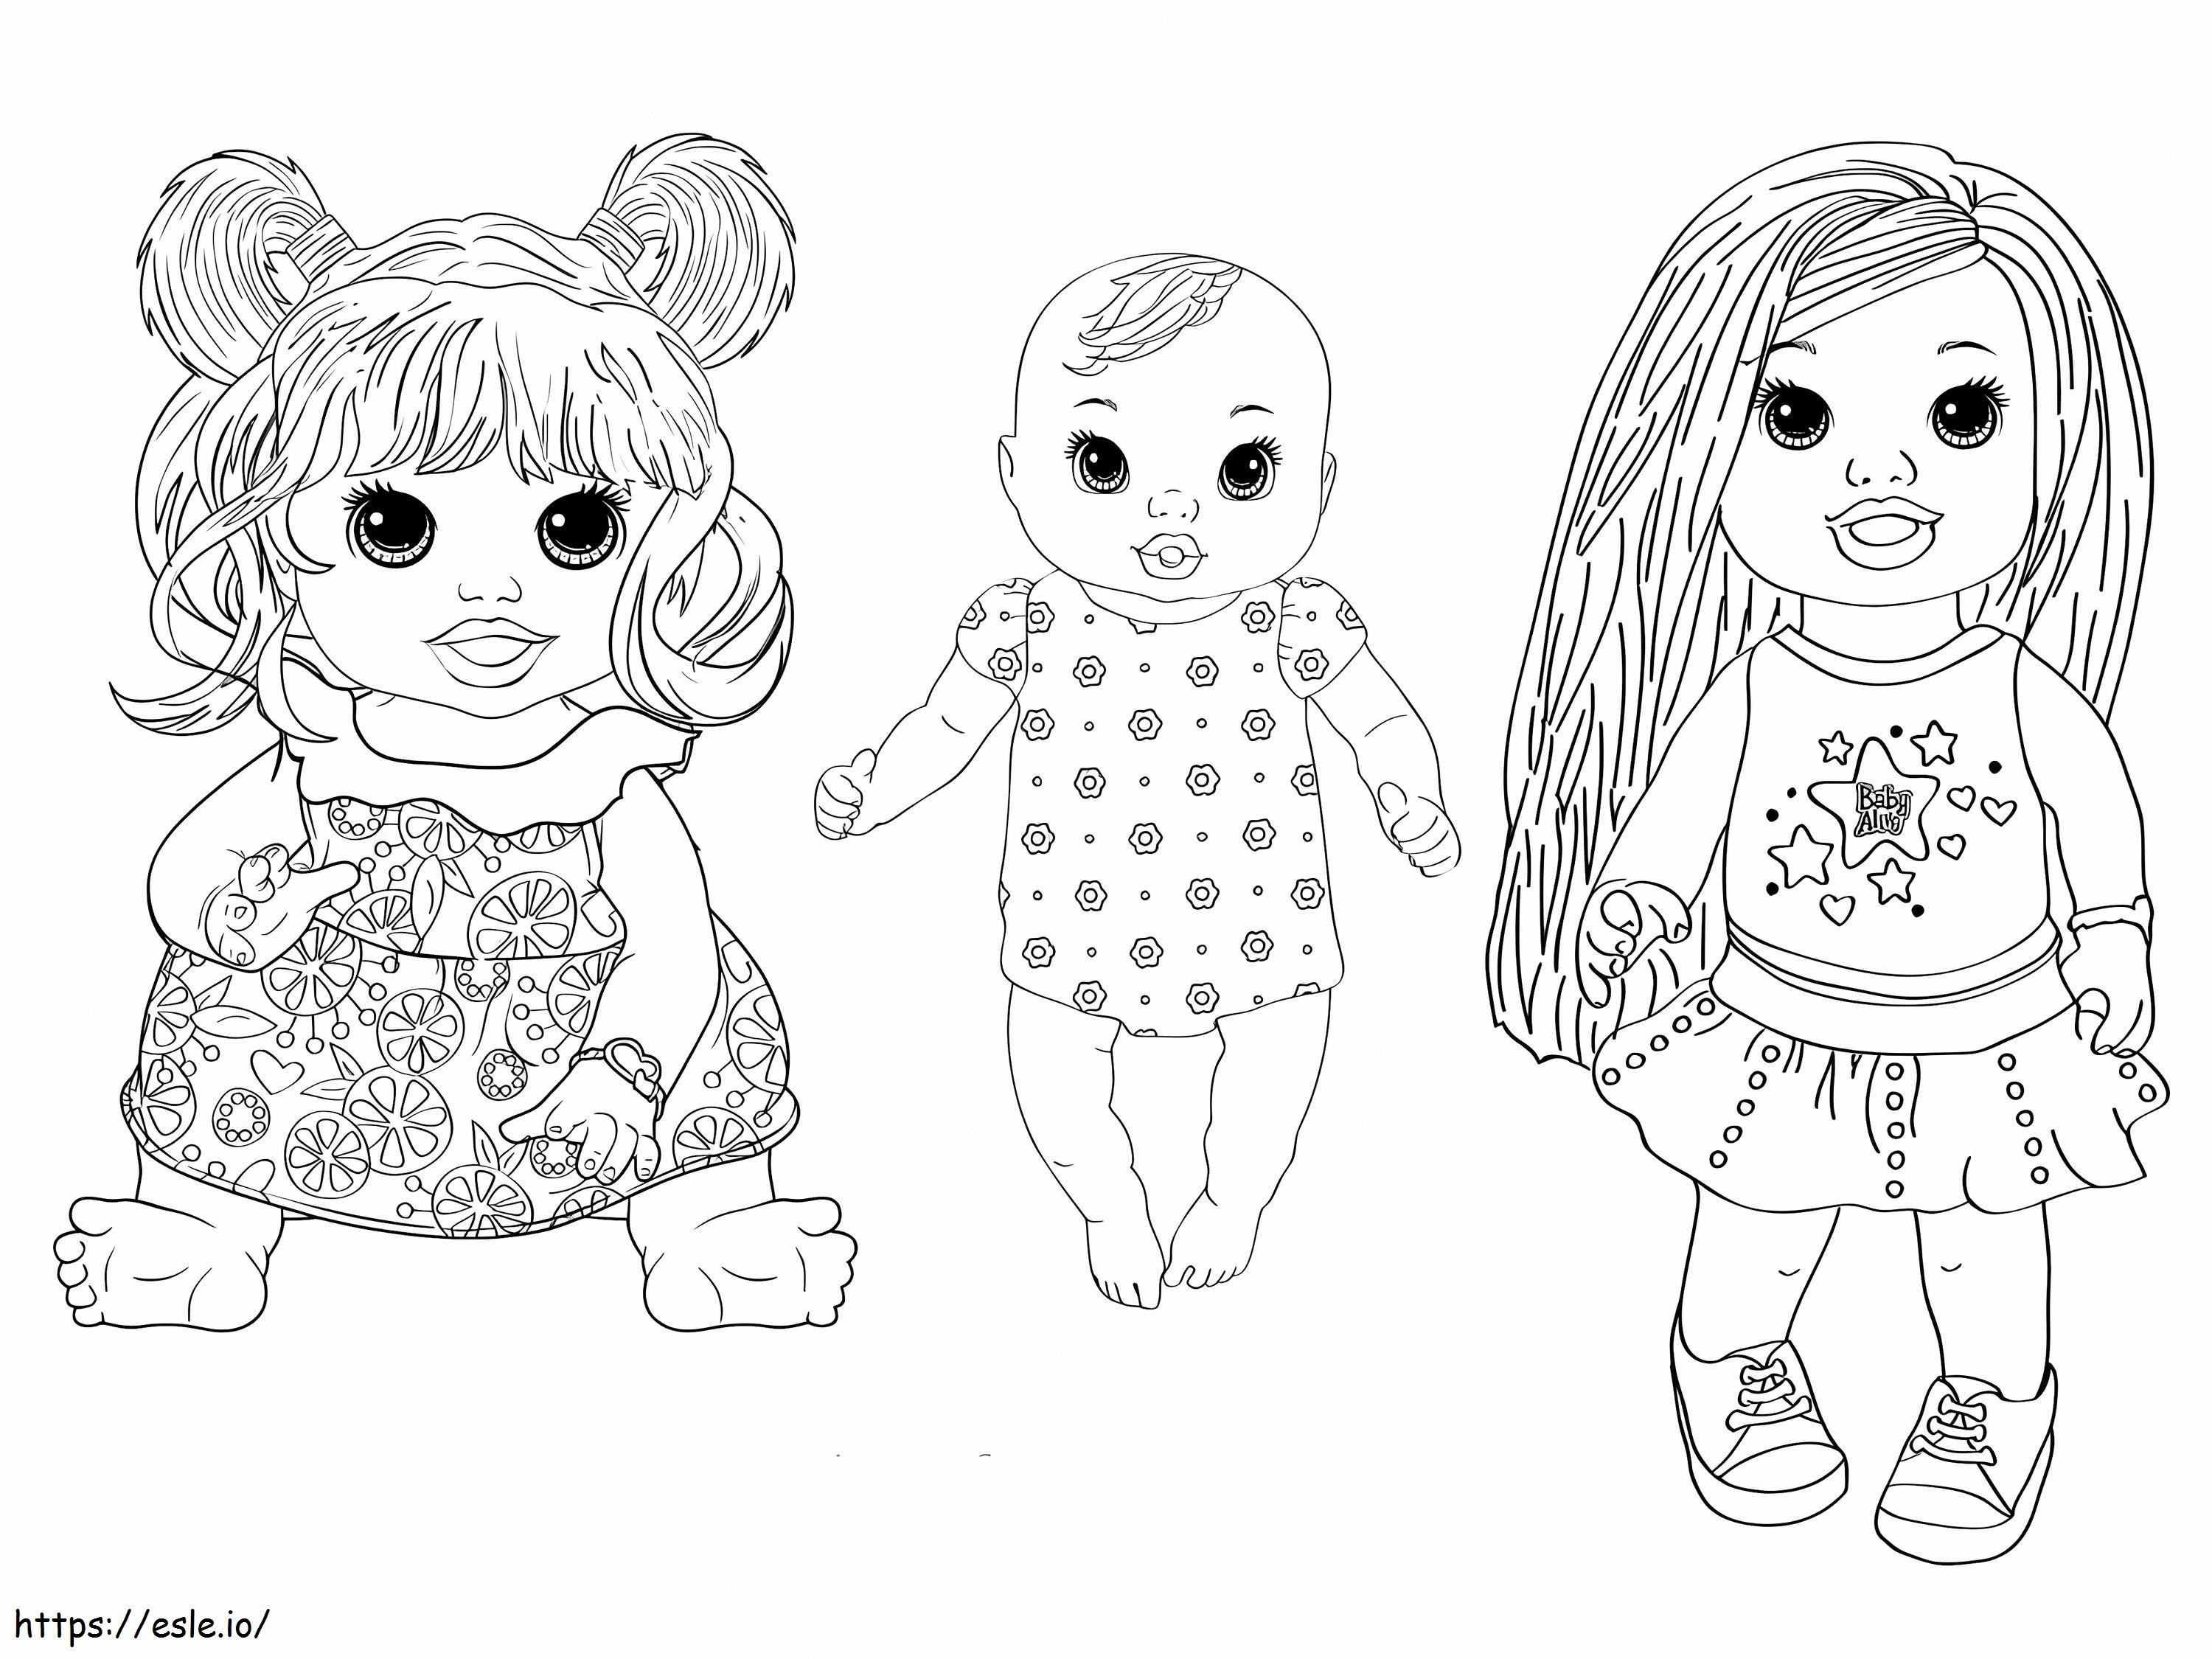 Baby Alive Dolls coloring page